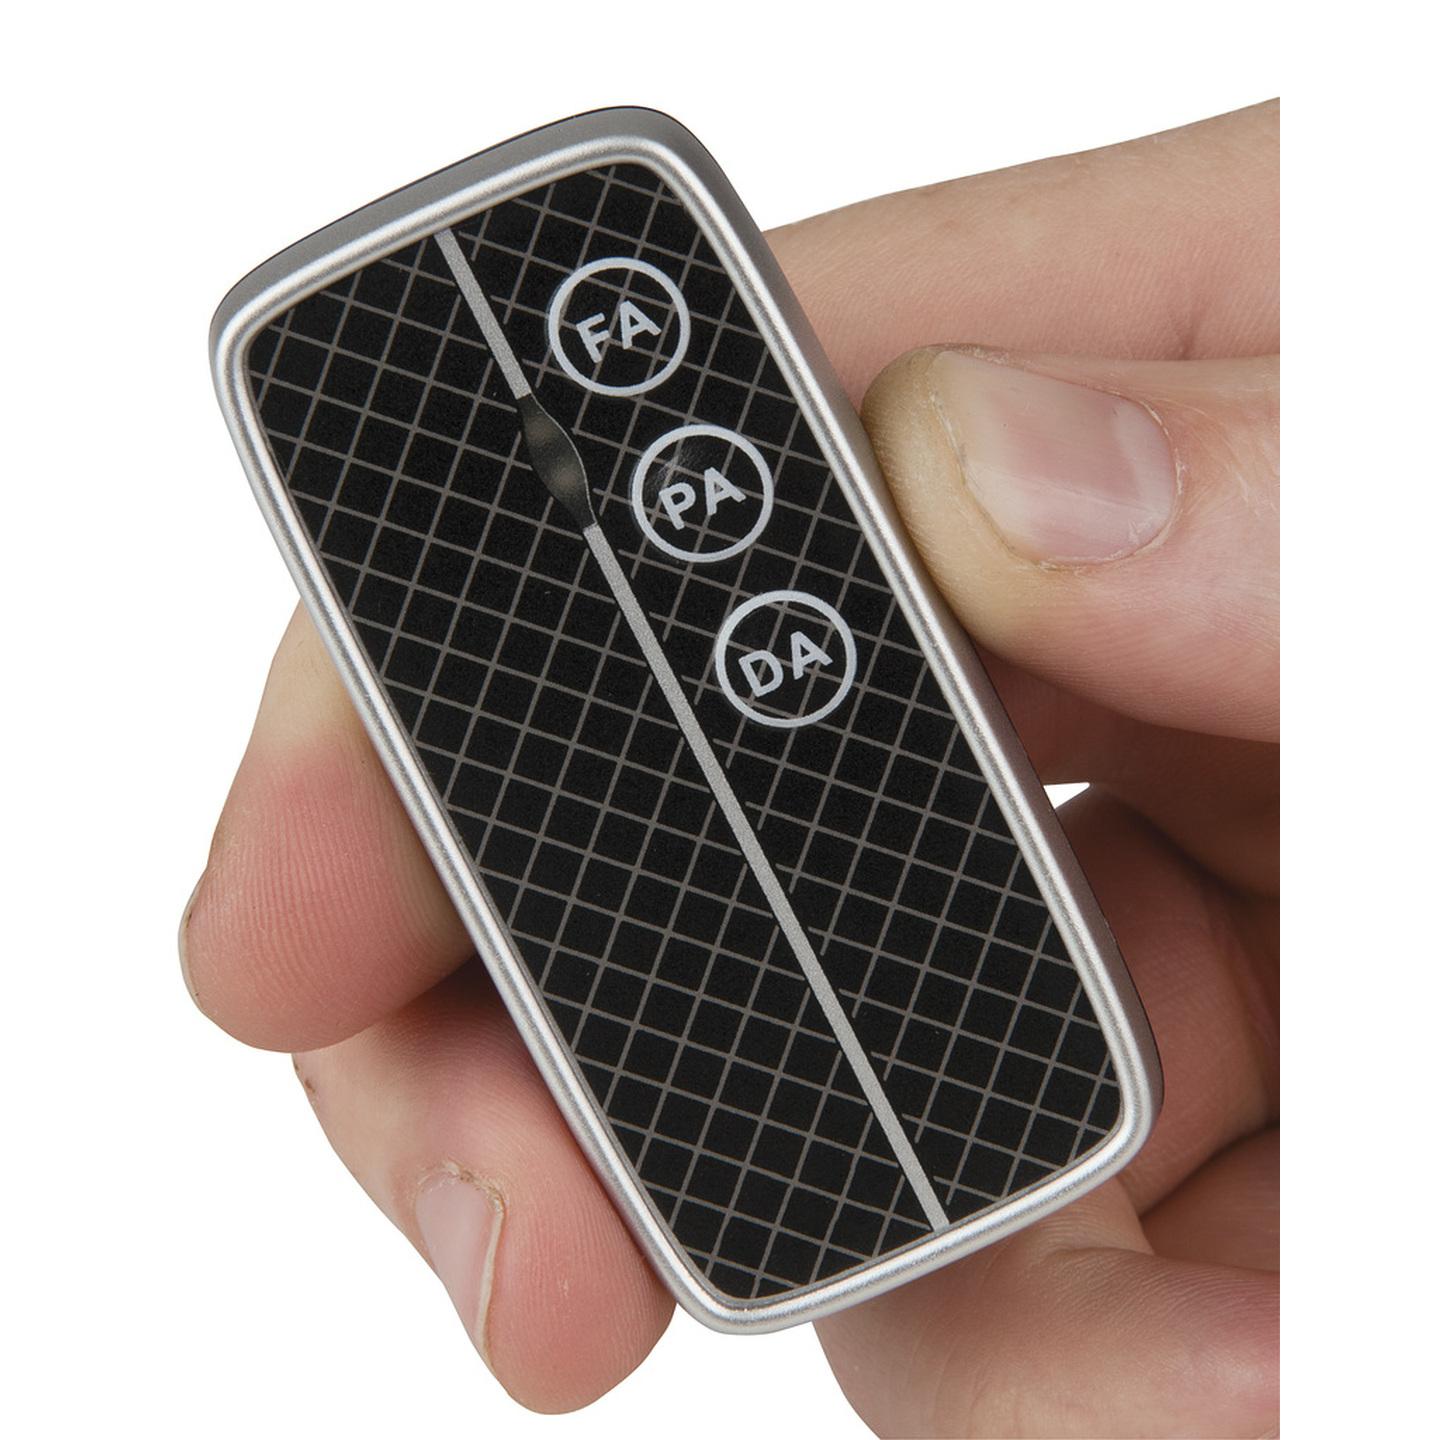 3 Button Wireless Remote Control to Suit Home Automation Systems